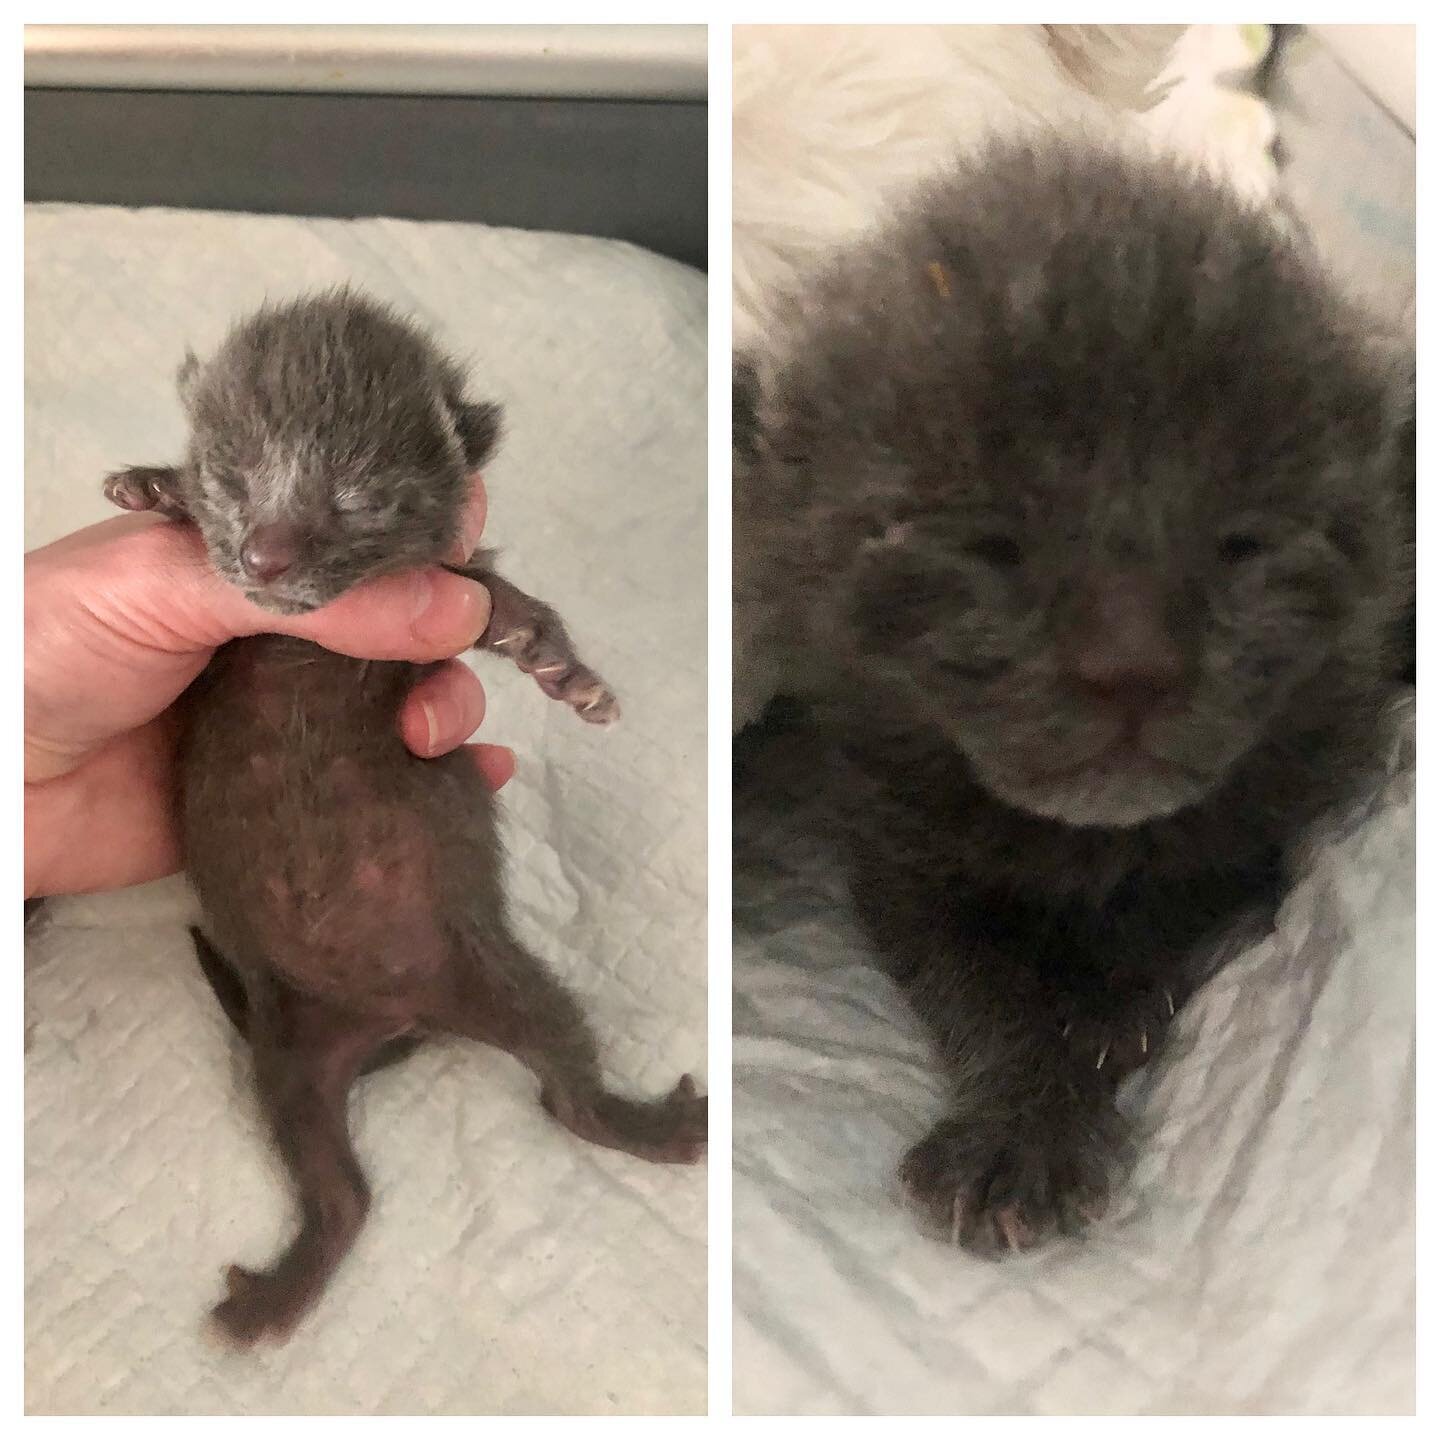 We Love Updates!! 
Update on our sweet and gorgeous Luke and Leia ❤️ We saved these 2 at only 1 week old and our amazing foster raised them until adoption.. They are so loved in their forever home, this is why we do what we do .. updates like these k